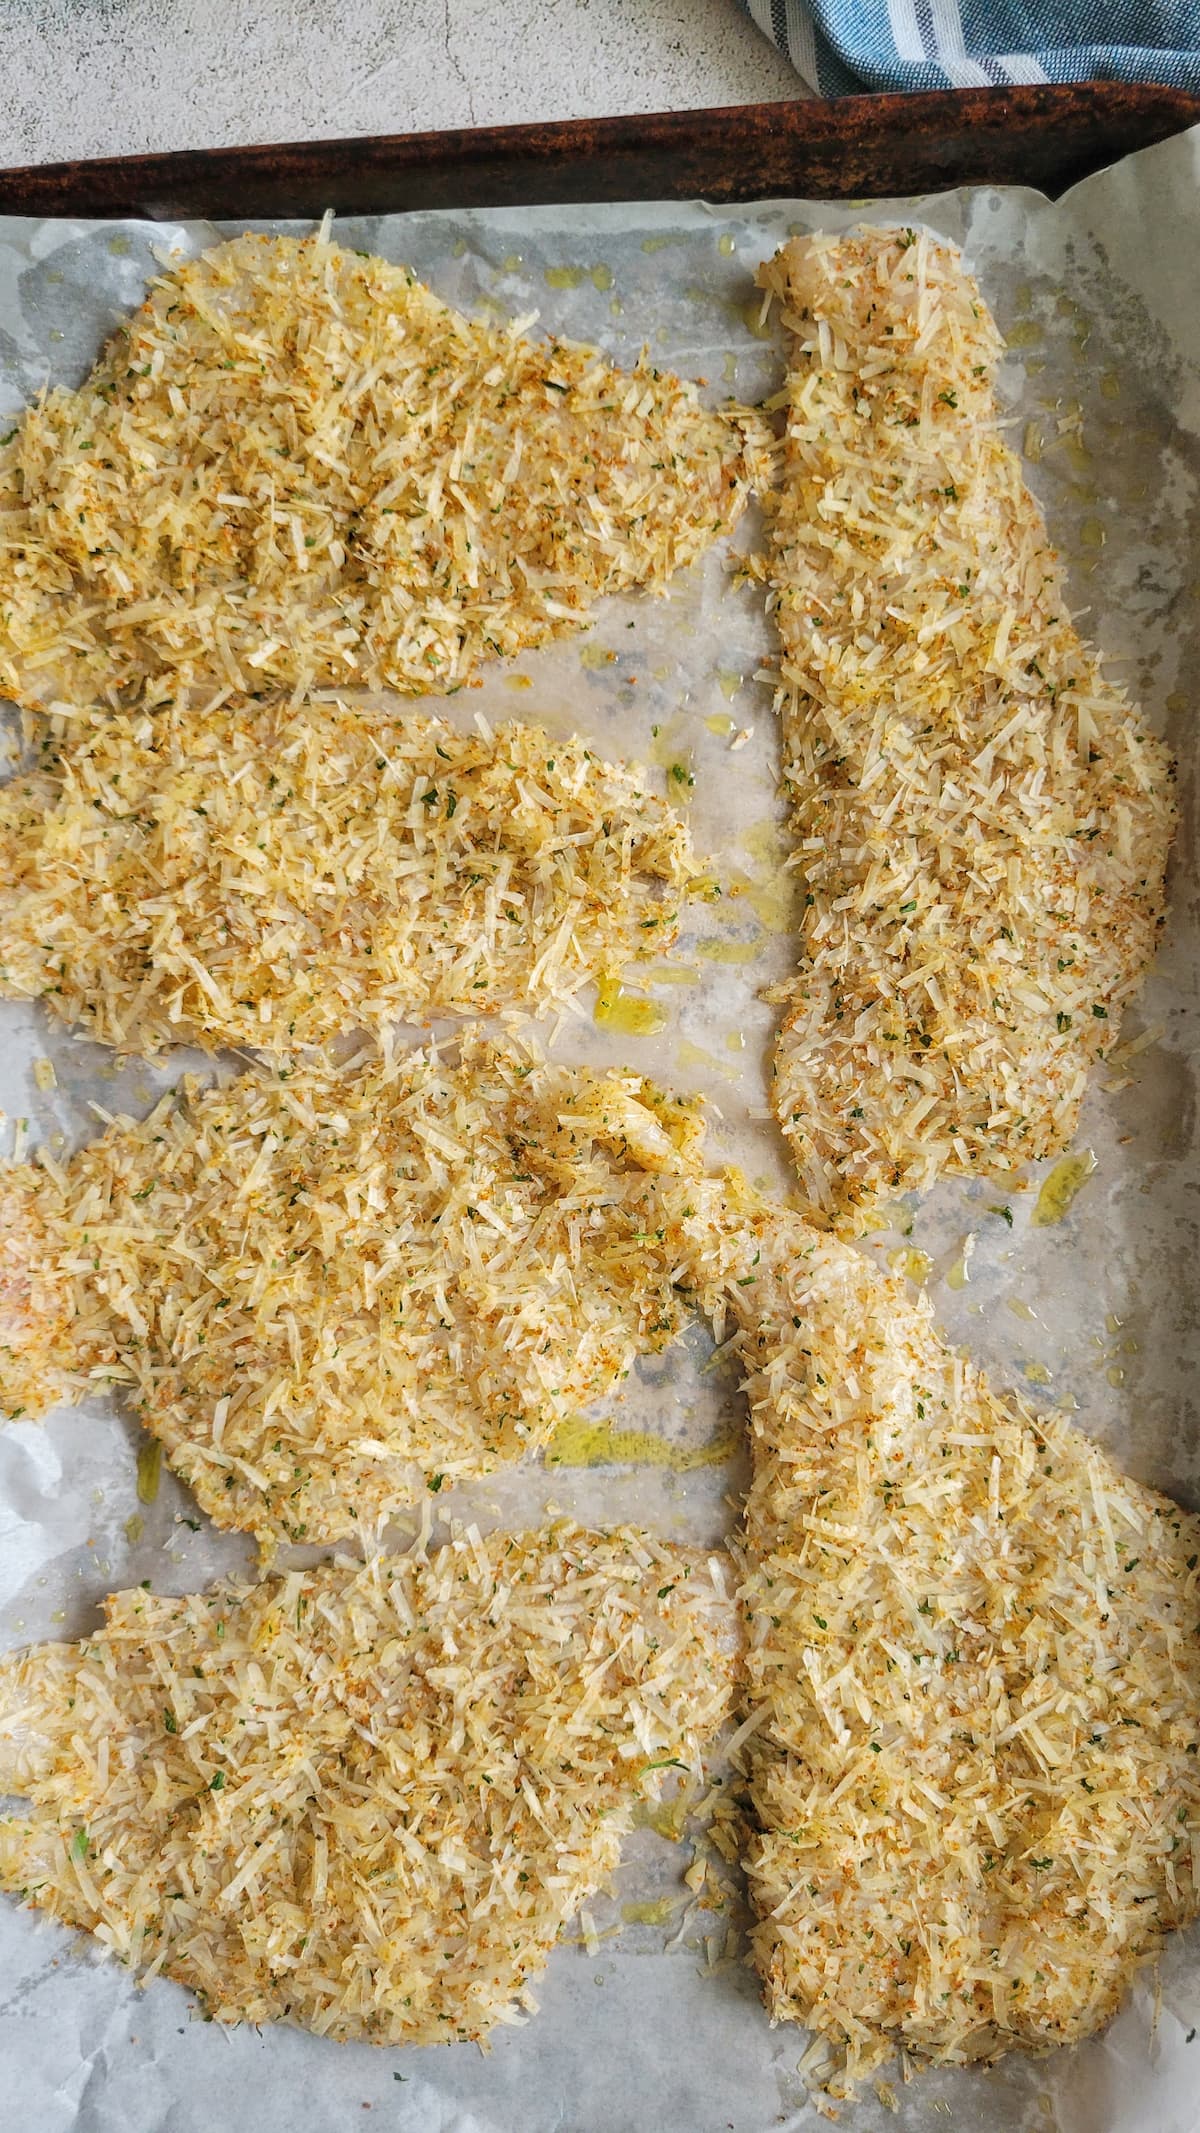 6 uncooked parmesan crusted fish fillets on a parchment lined baking sheet